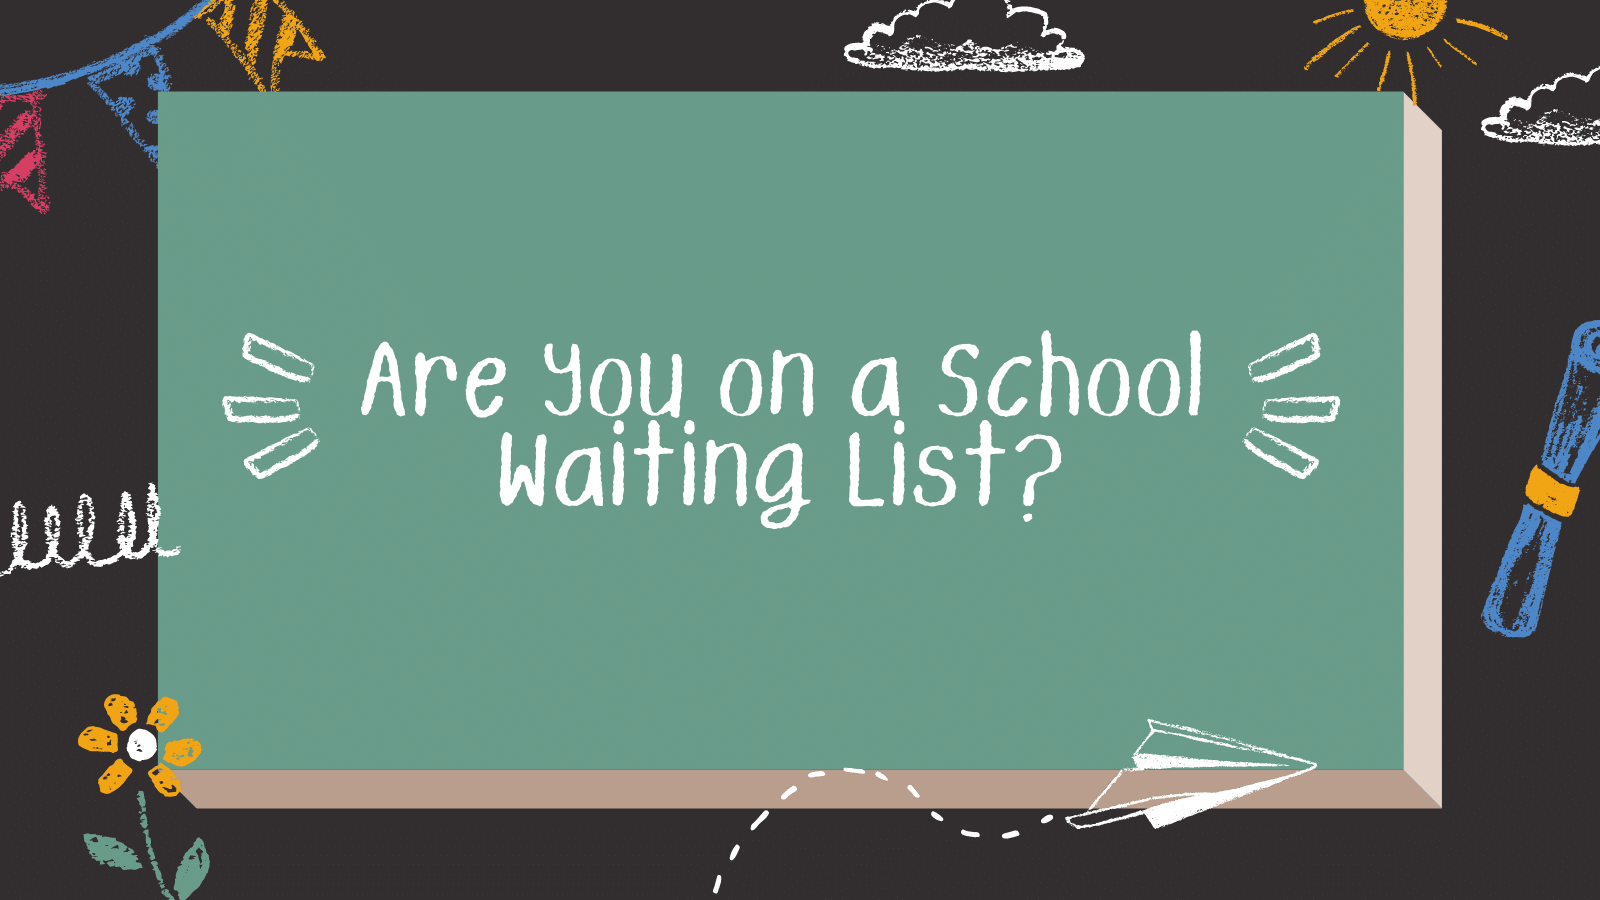 Are You on a School Waiting List?